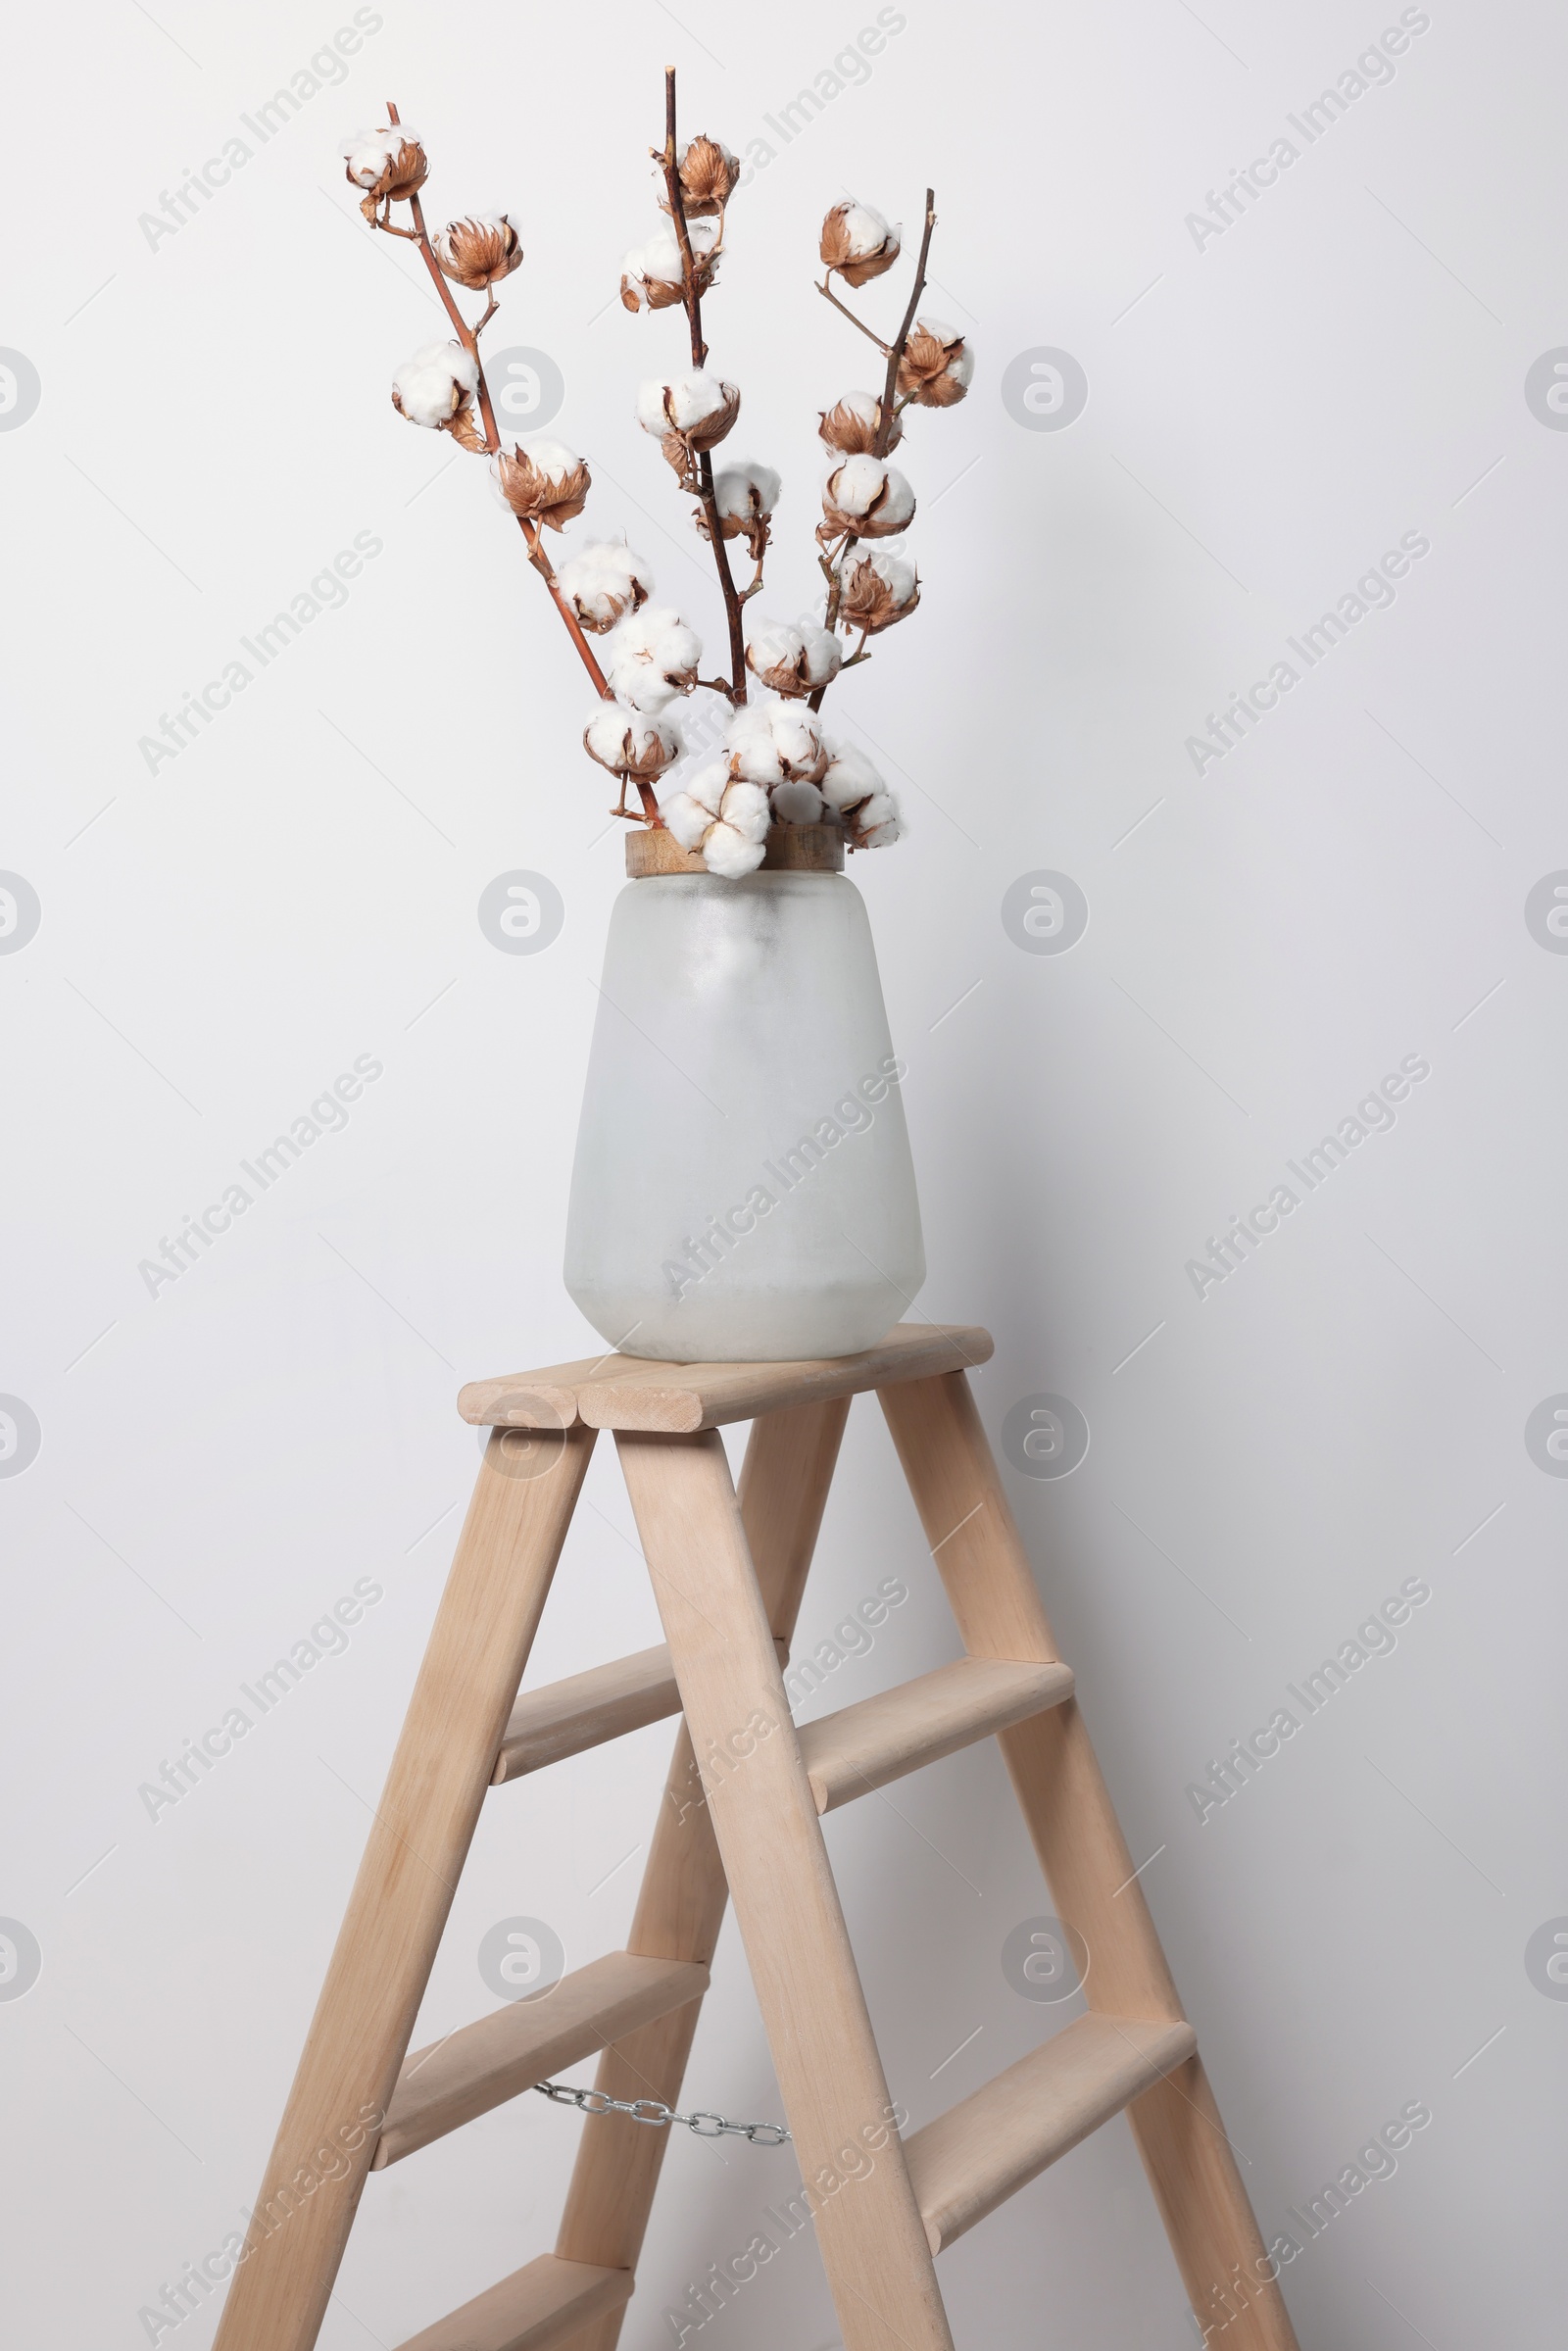 Photo of Cotton branches with fluffy flowers in vase on wooden ladder near white wall